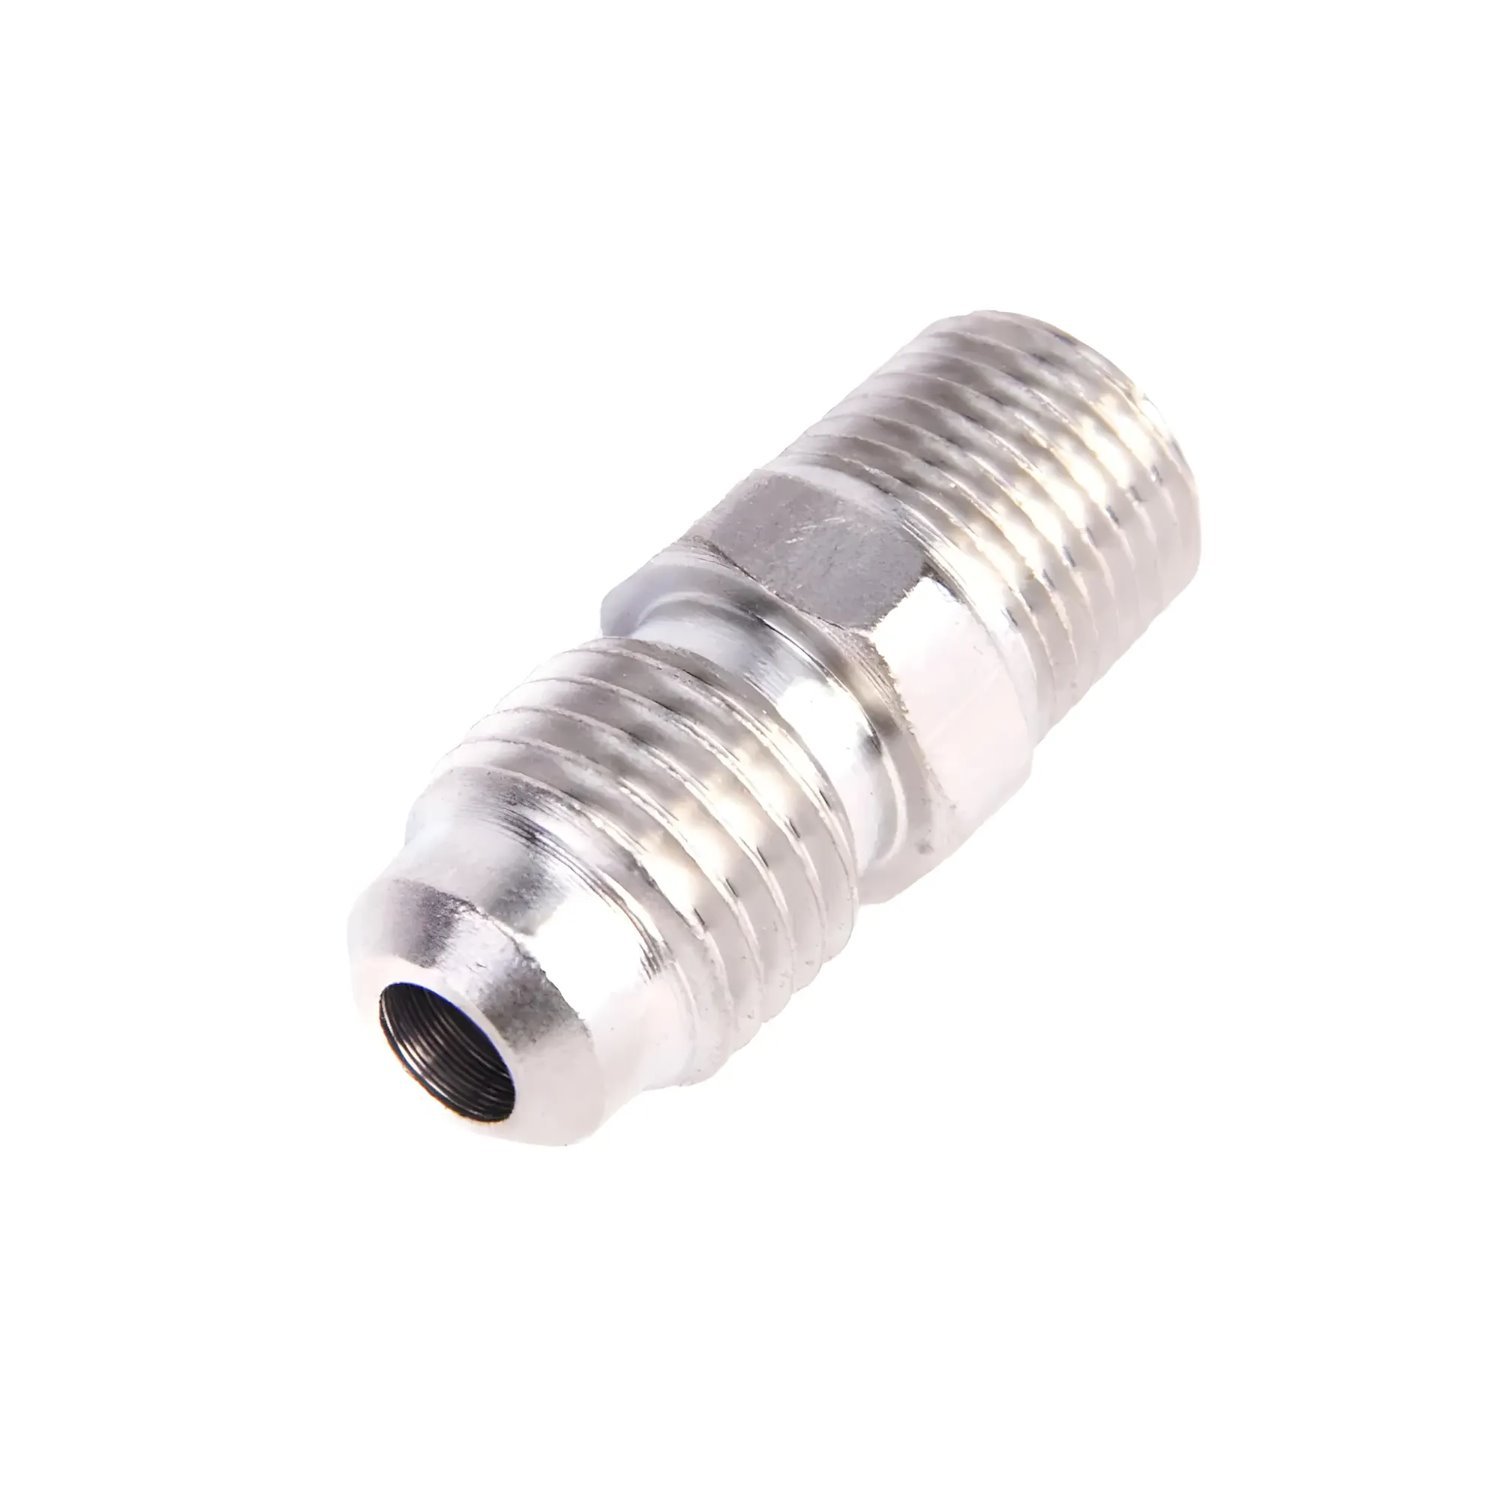 00-01152-B 1/8 in. NPT x 4AN Straight Fitting, Male/Male